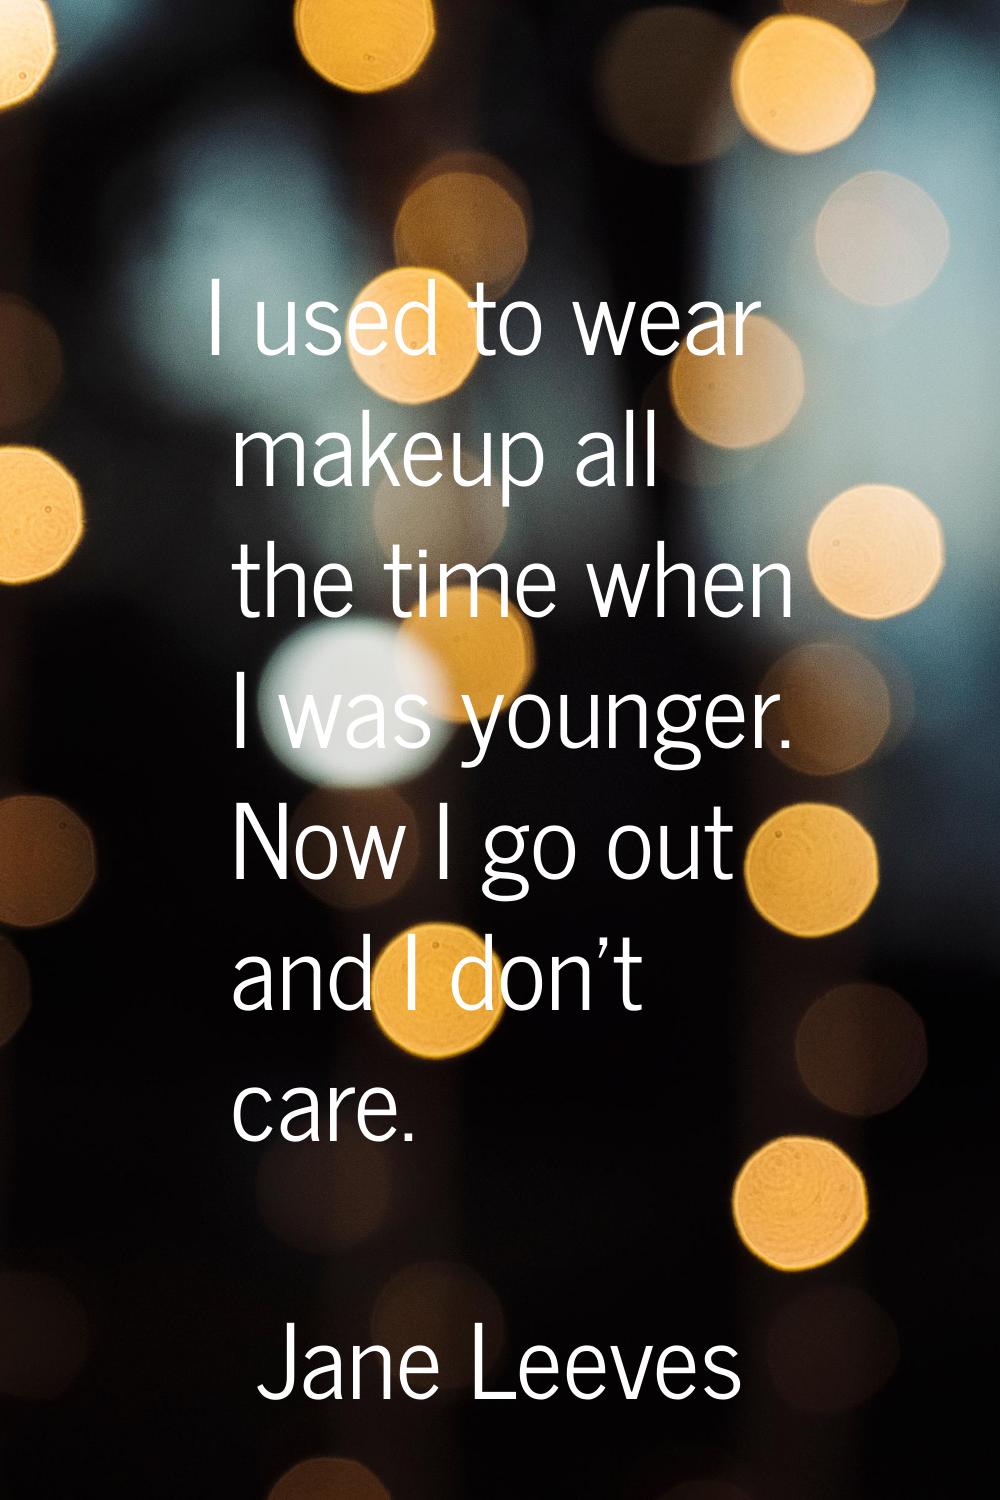 I used to wear makeup all the time when I was younger. Now I go out and I don't care.